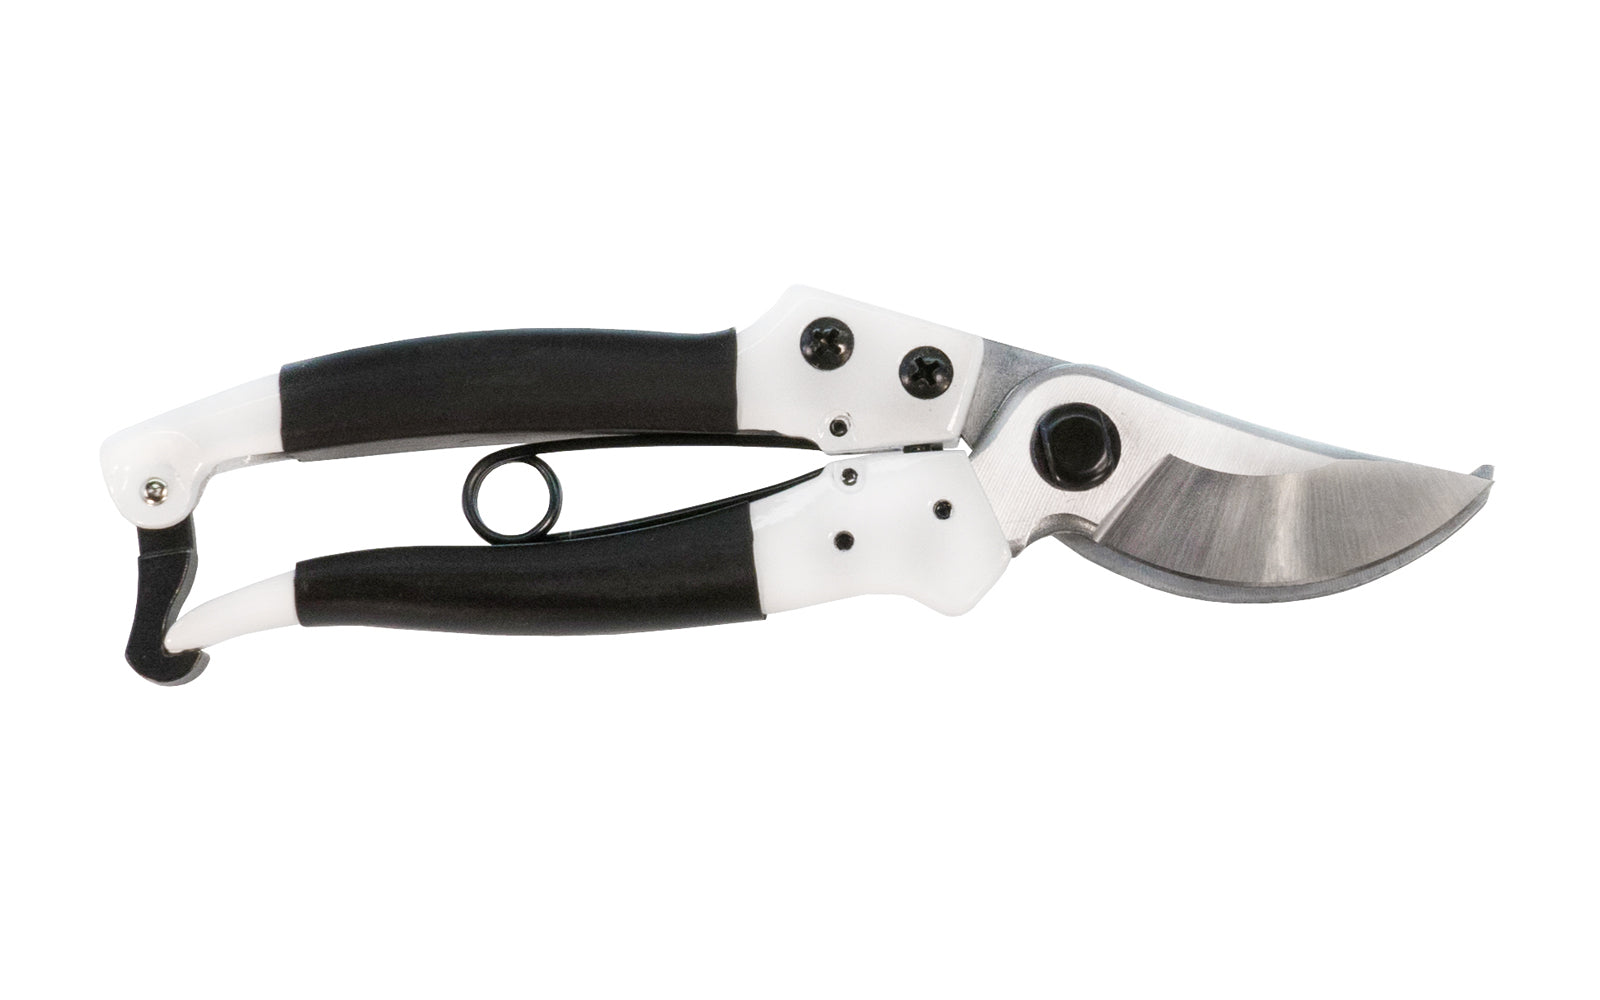 These Japanese Kamaki Bypass Pruners are good quality pruners that have nice smooth cuts. Great multi-purpose pruner great for many various garden tasks such as trimming, pruning, thinning, & general purpose cutting. Locking mechanism on the end of the handle. Rubberized no-slip grip handle. Model 880. 4953699008801